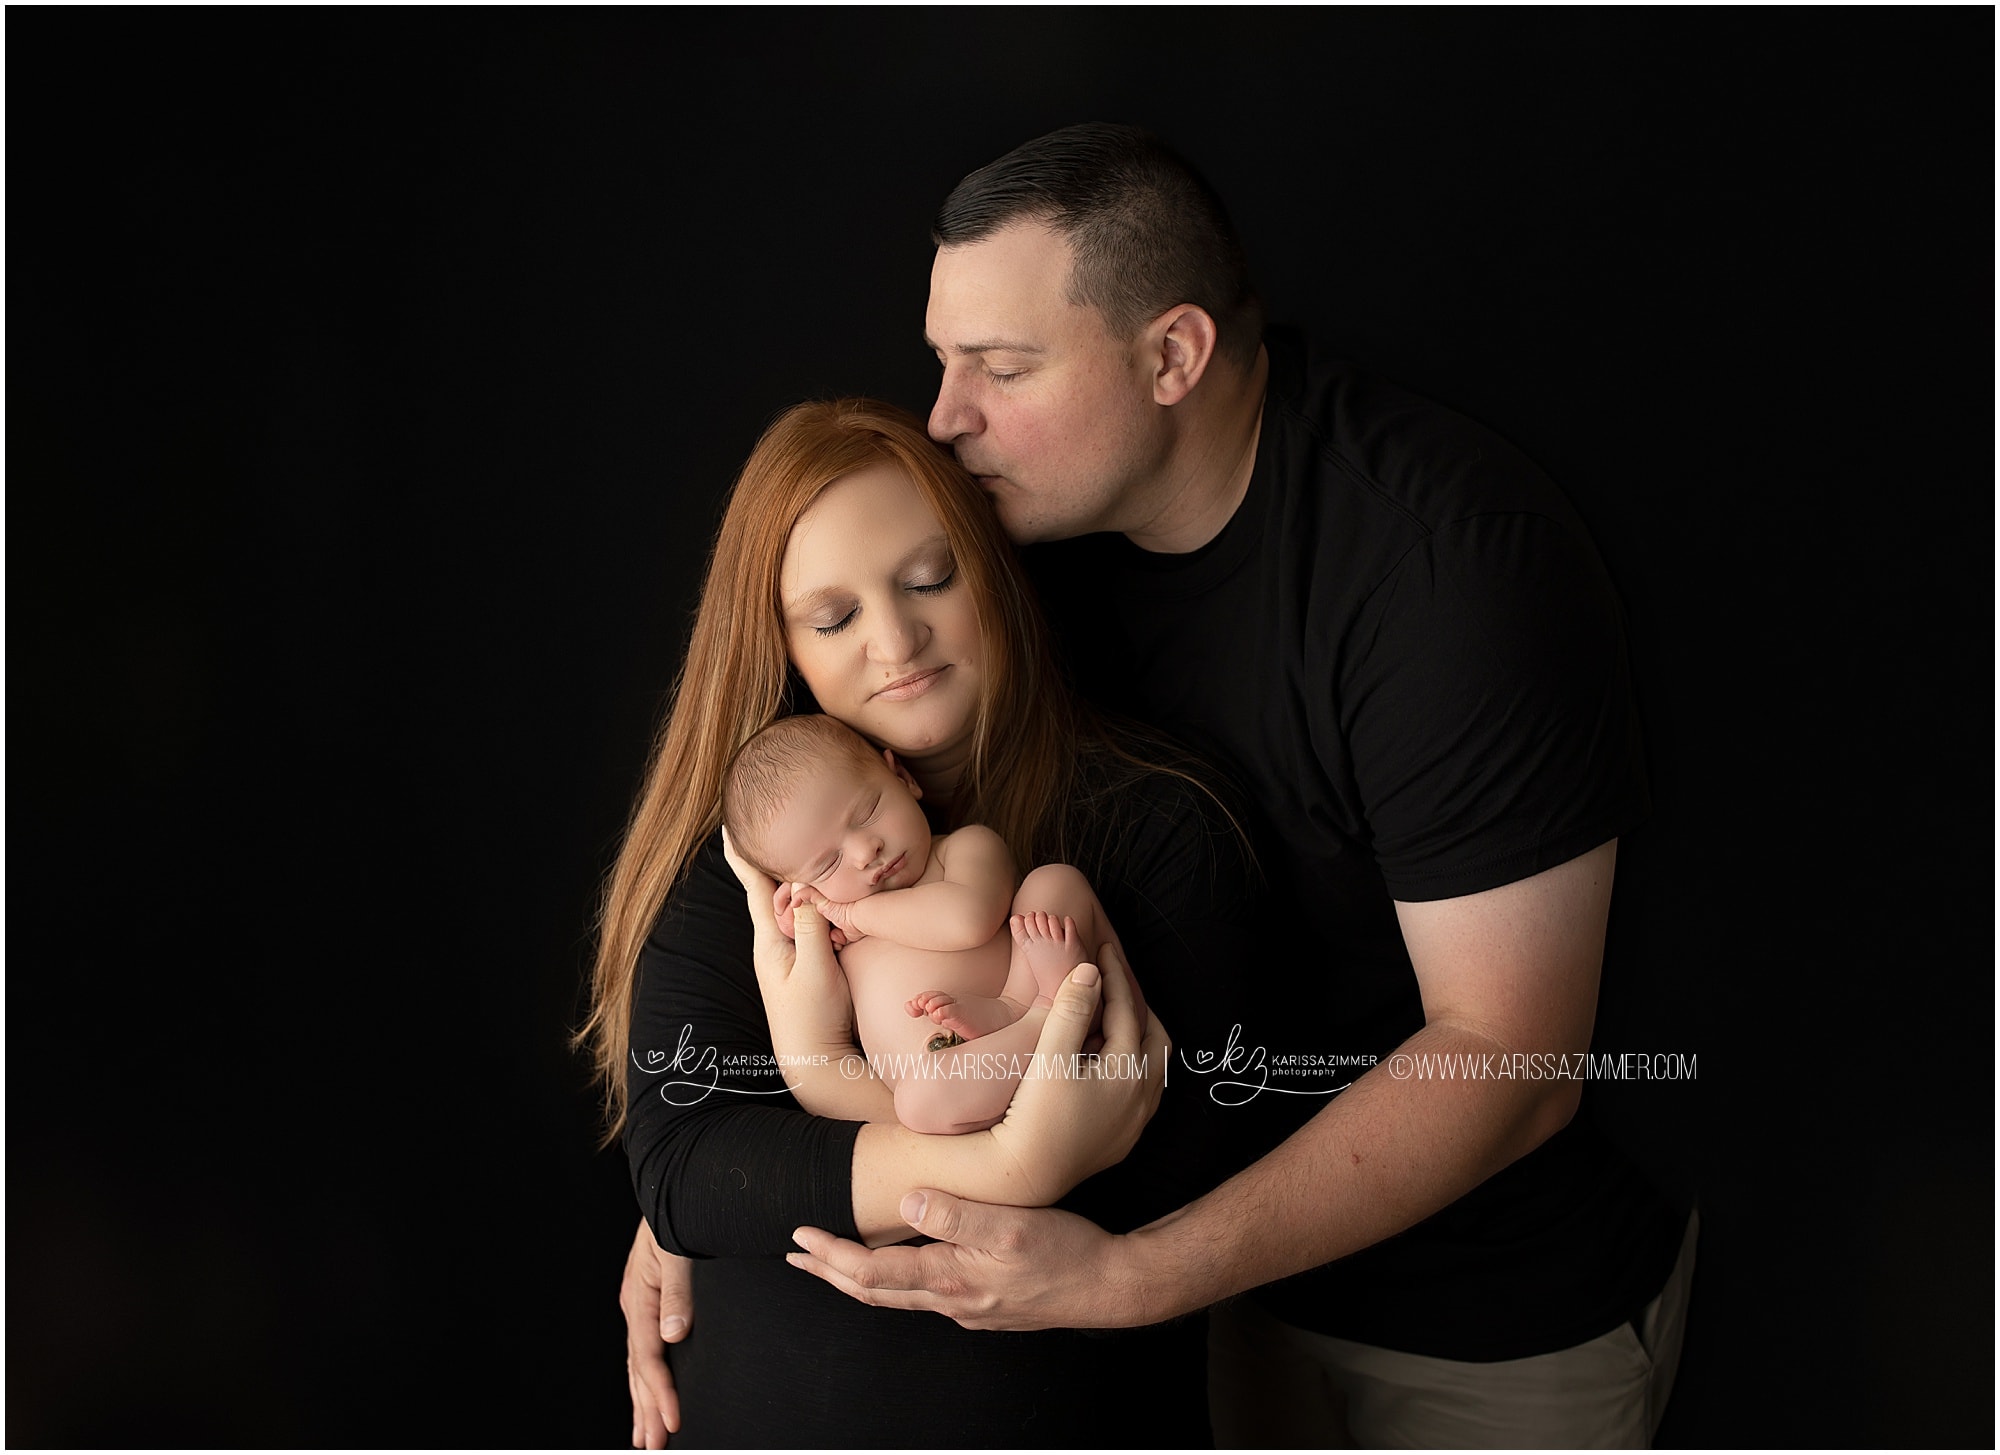 Mother, father, and newborn pose during studio newborn photography session at camp hill PA photo studio